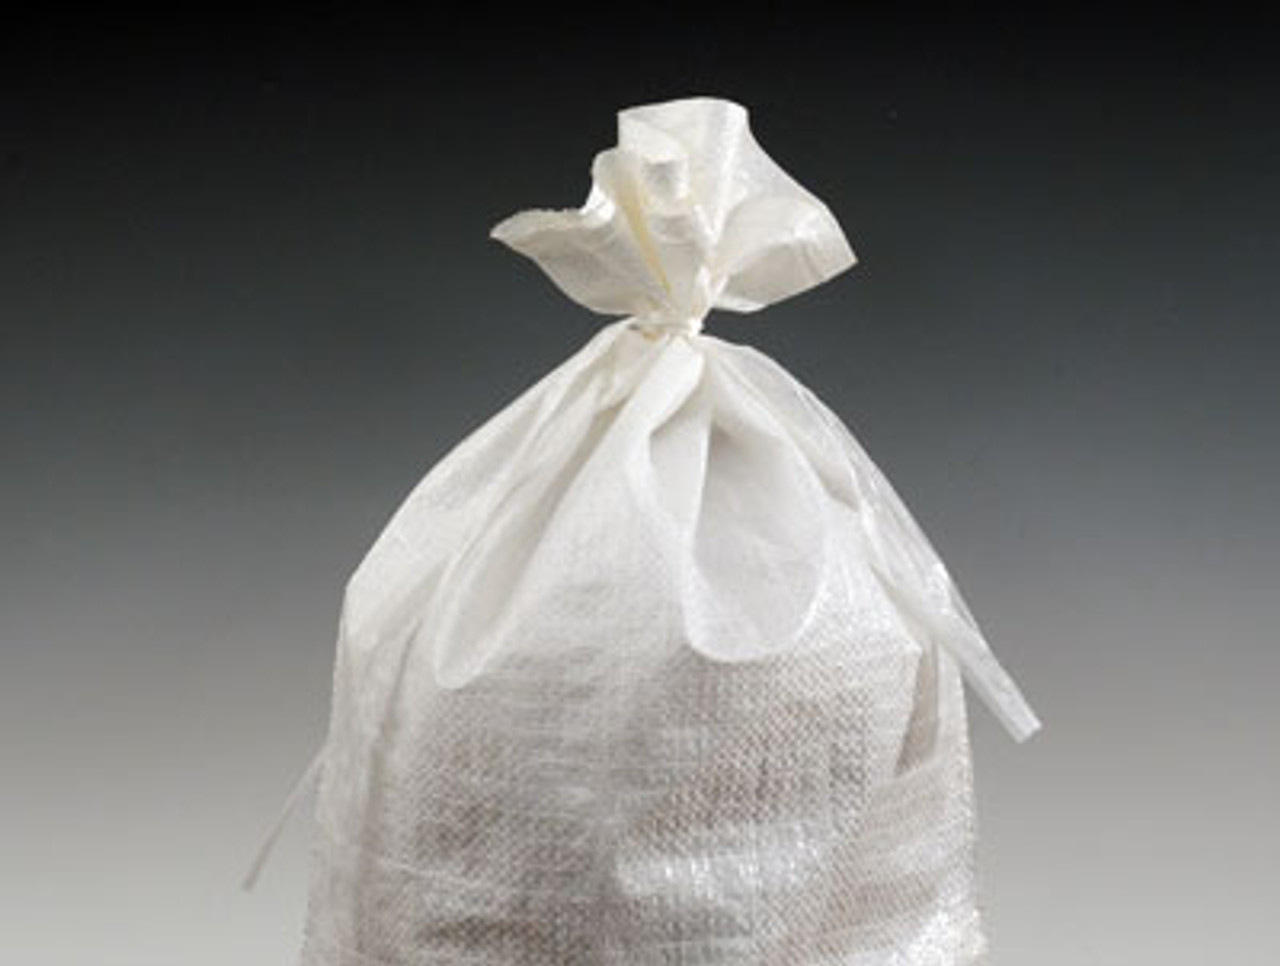 14" x 26" Woven Polypropylene Bag with Attached Tie-String